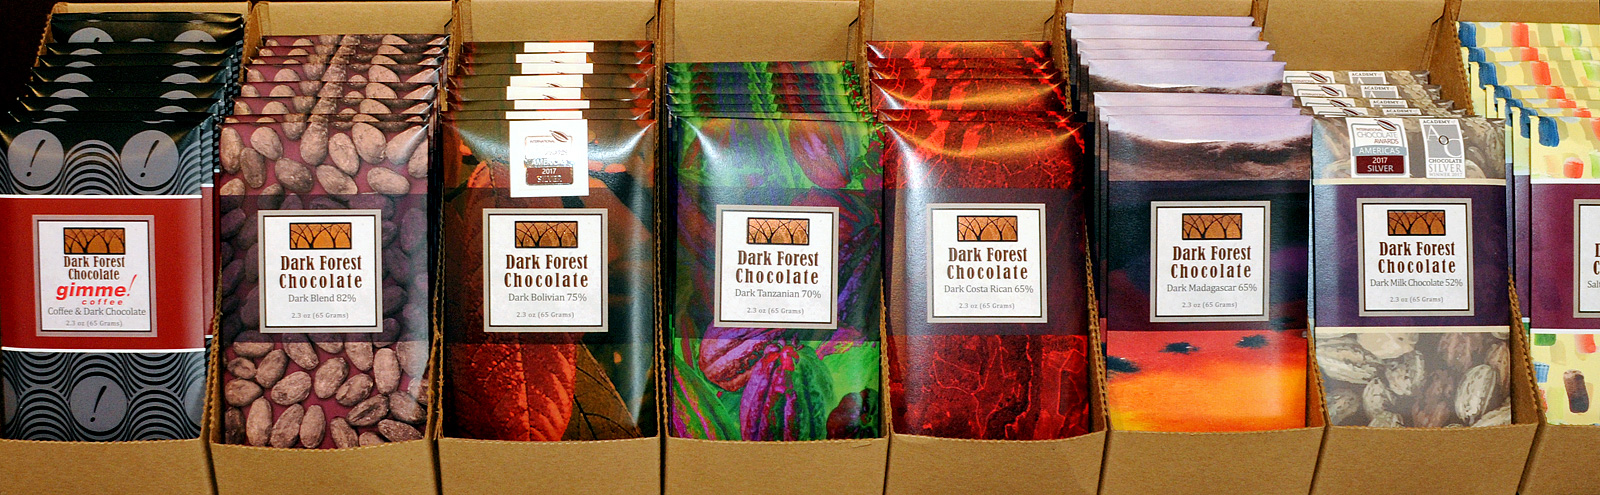 Dark Forest Chocolate Makers produces a variety of candy bars.